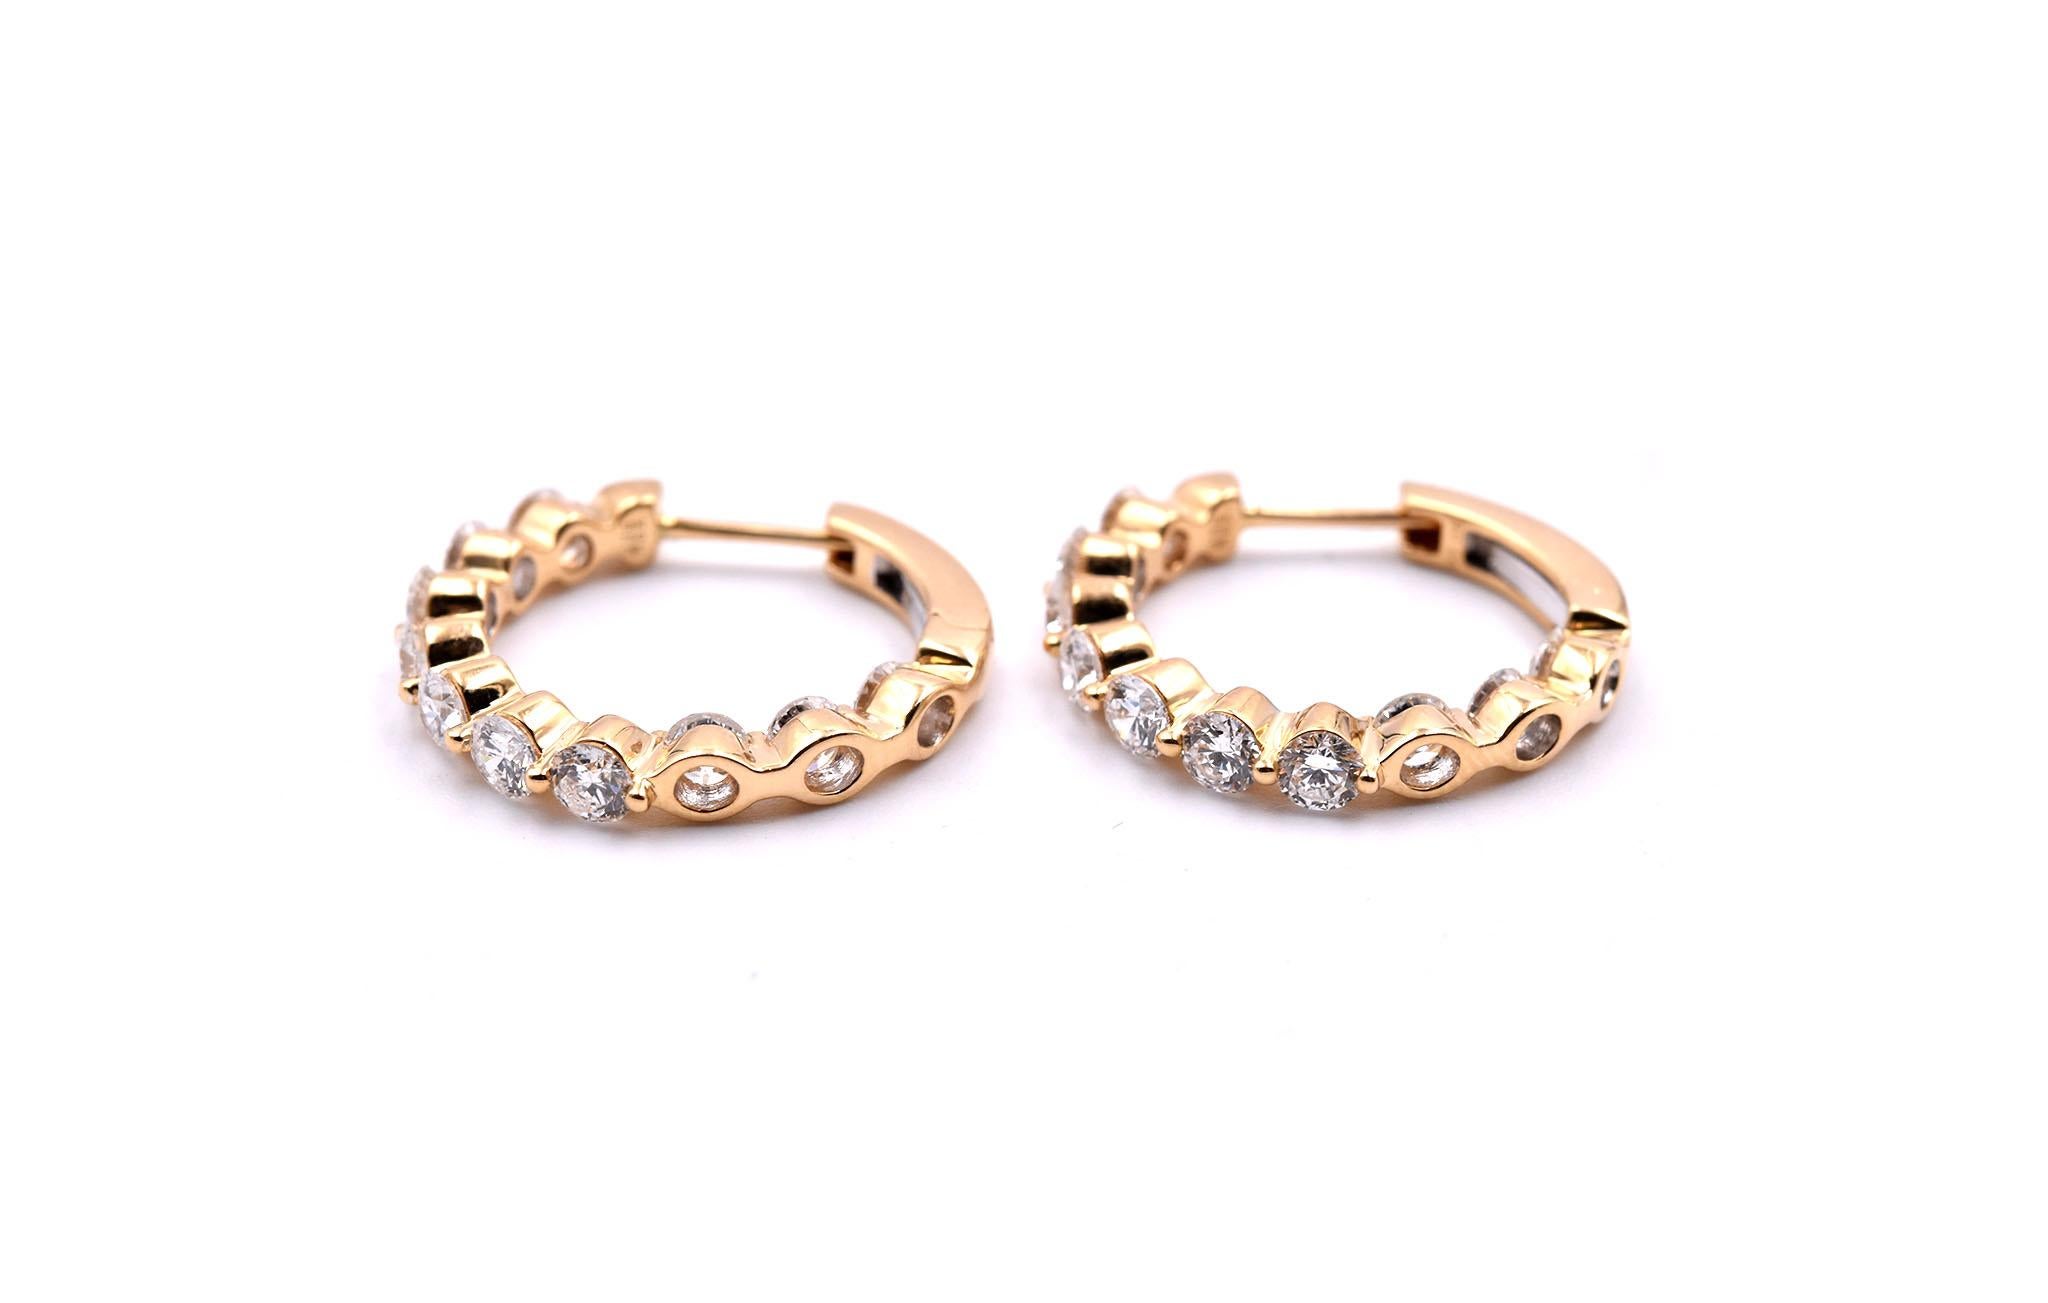 Designer: custom design
Material: 18k yellow gold
Diamonds: 20 round brilliant cut = 2.08cttw
Color: G
Clarity: VS
Dimensions: earrings are approximately 19.25mm in diameter 
Fastenings: hinged hoop 
Weight: 3.30 grams